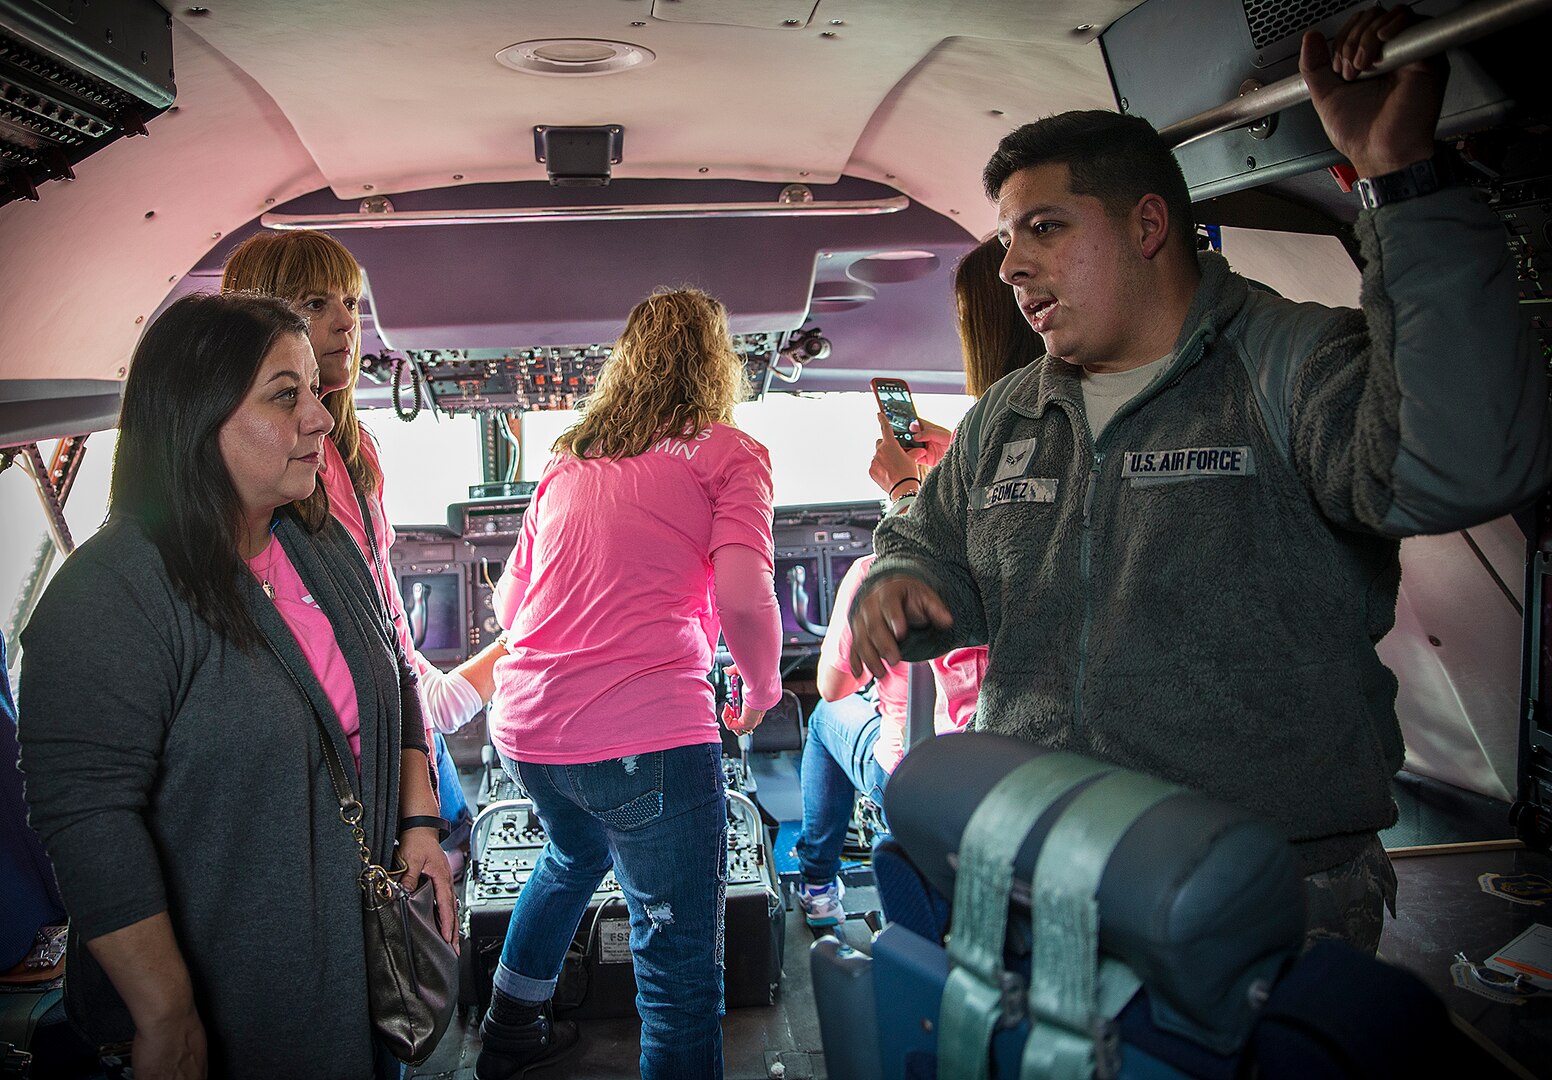 Senior Airman Rolando Gomez, 433rd Aircraft Maintenance Squadron hydrolic technician, explains his job to Lisa Haar, Air Force Wing Moms founder, during a C-5M Super Galaxy tour Jan. 5, 2017 at Joint Base San Antonio-Lackland,Texas. The AFWM's mission is to provide support to family members and friends of trainees who are  experiencing Air Force Basic Military Training. (U.S. Air Force photo by Benjamin Faske)